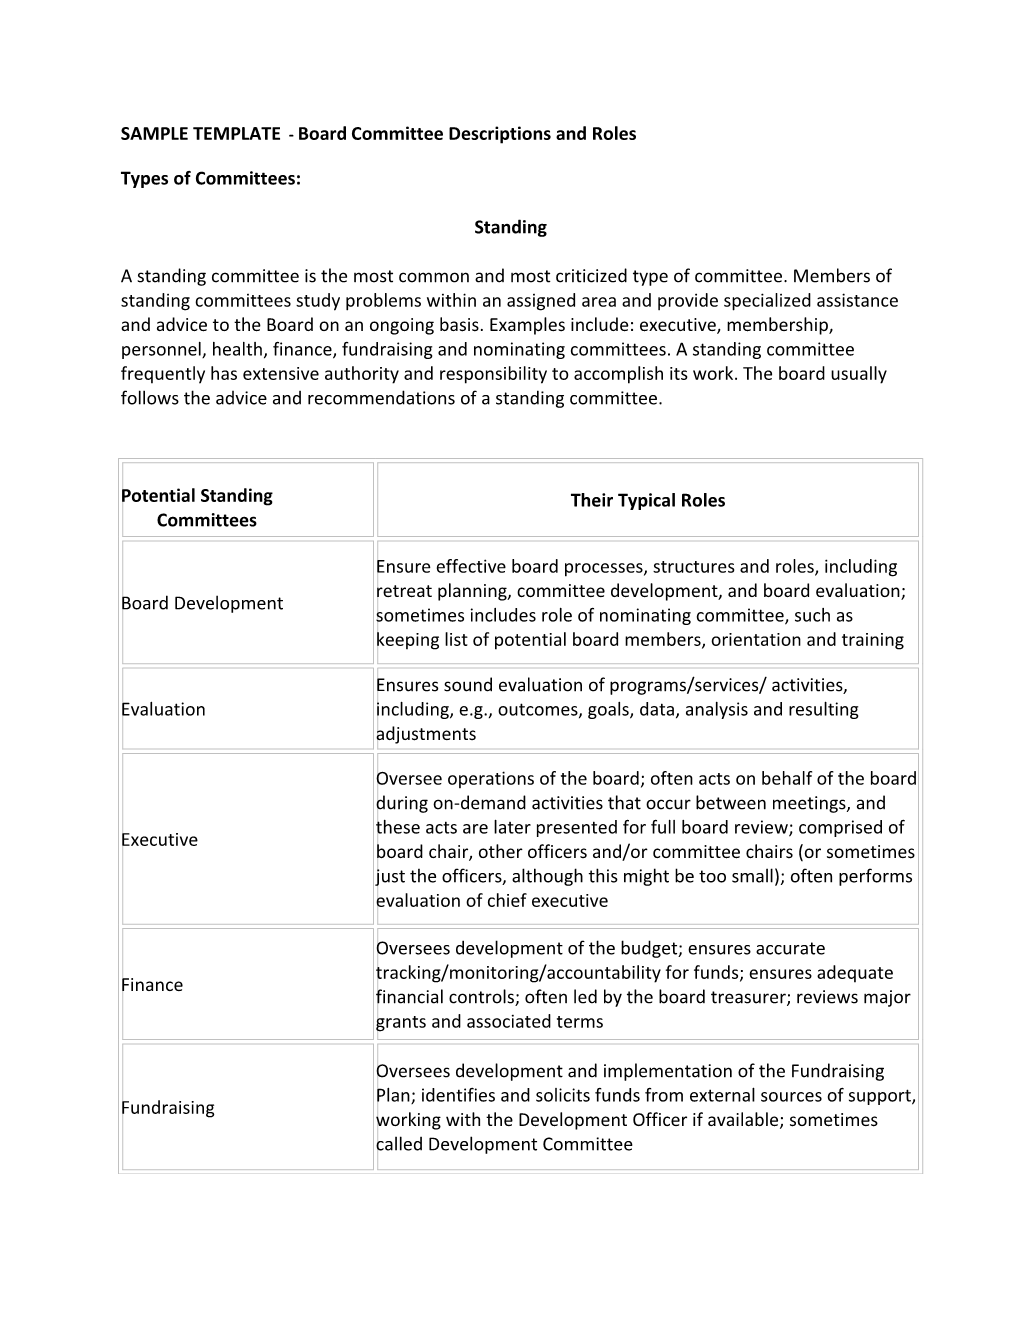 SAMPLE TEMPLATE - Board Committee Descriptions and Roles